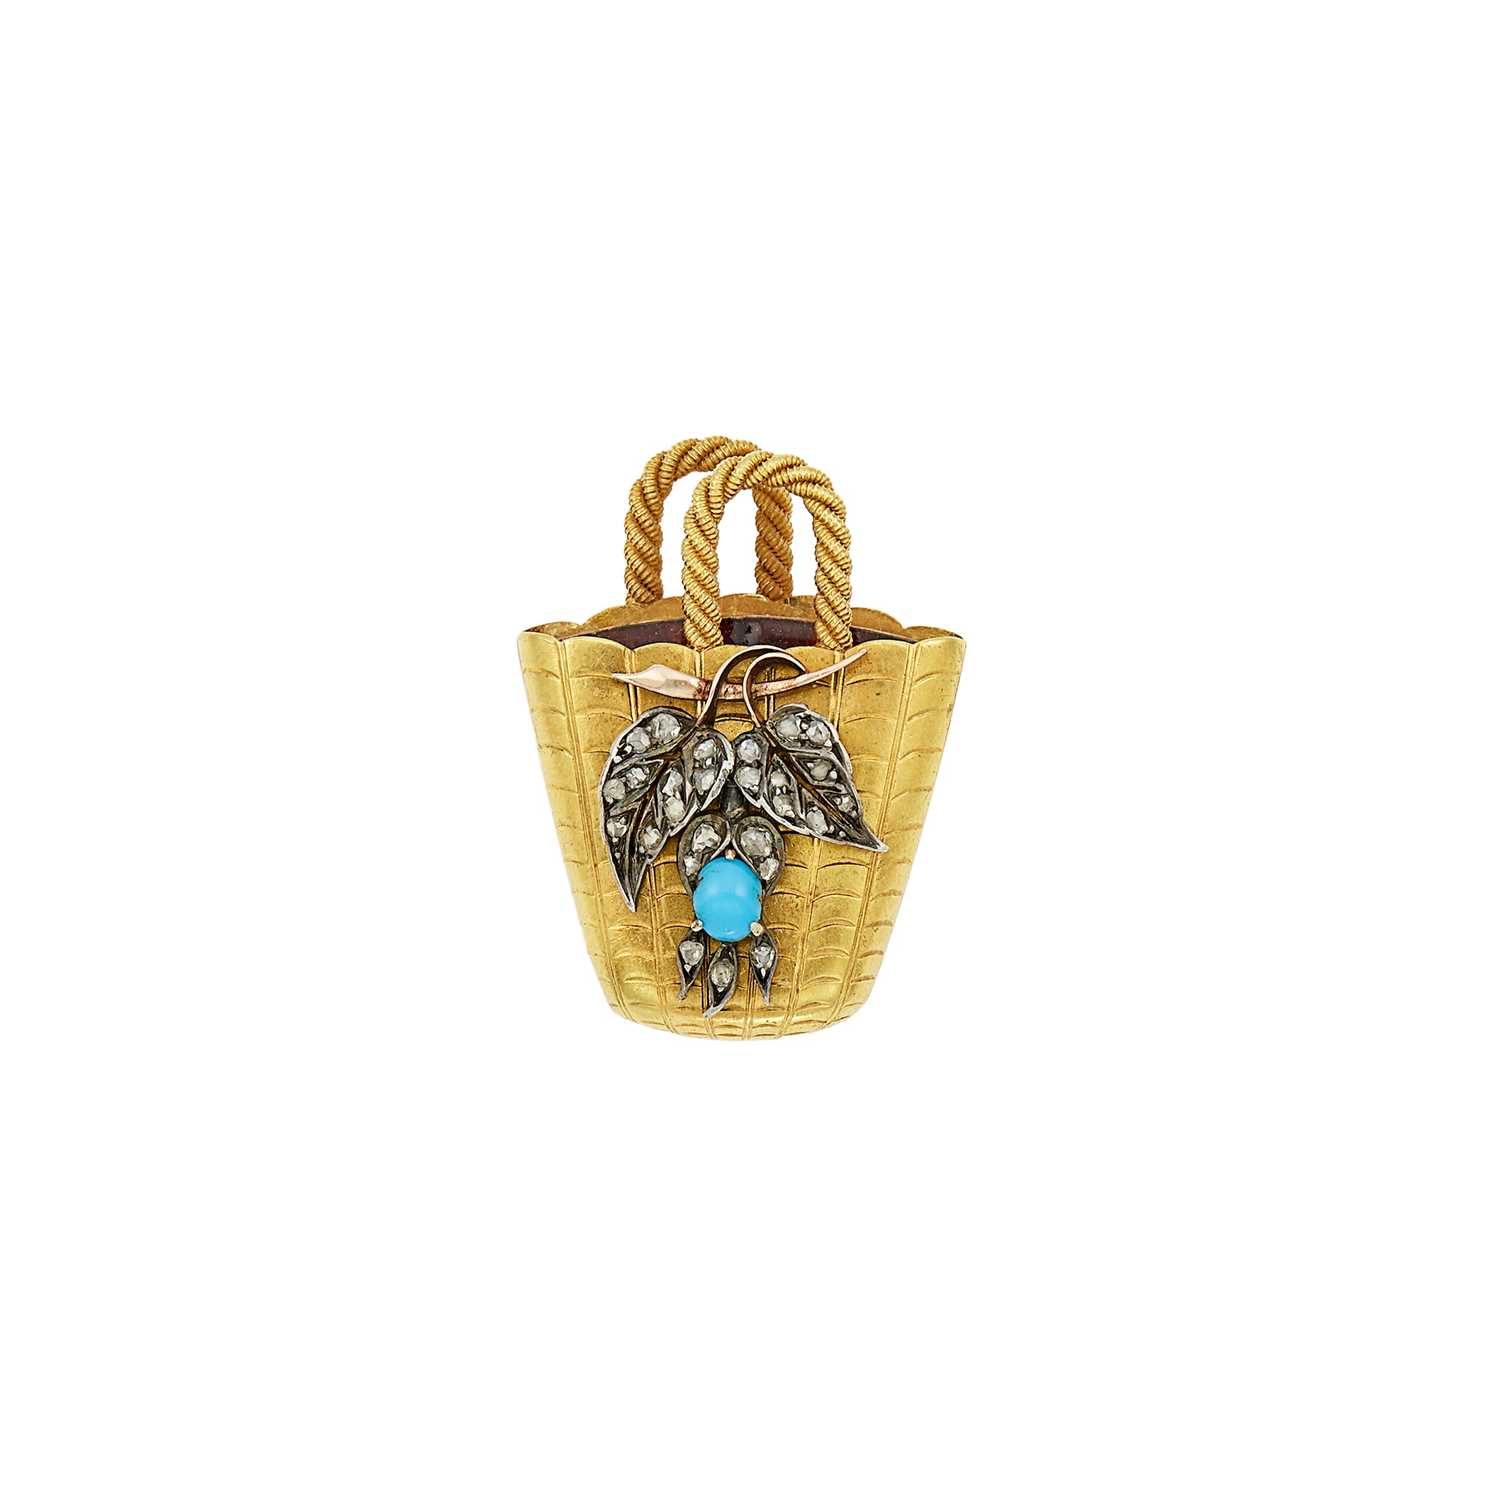 Lot 1121 - Antique Gold, Silver, Turquoise and Diamond Basket Brooch